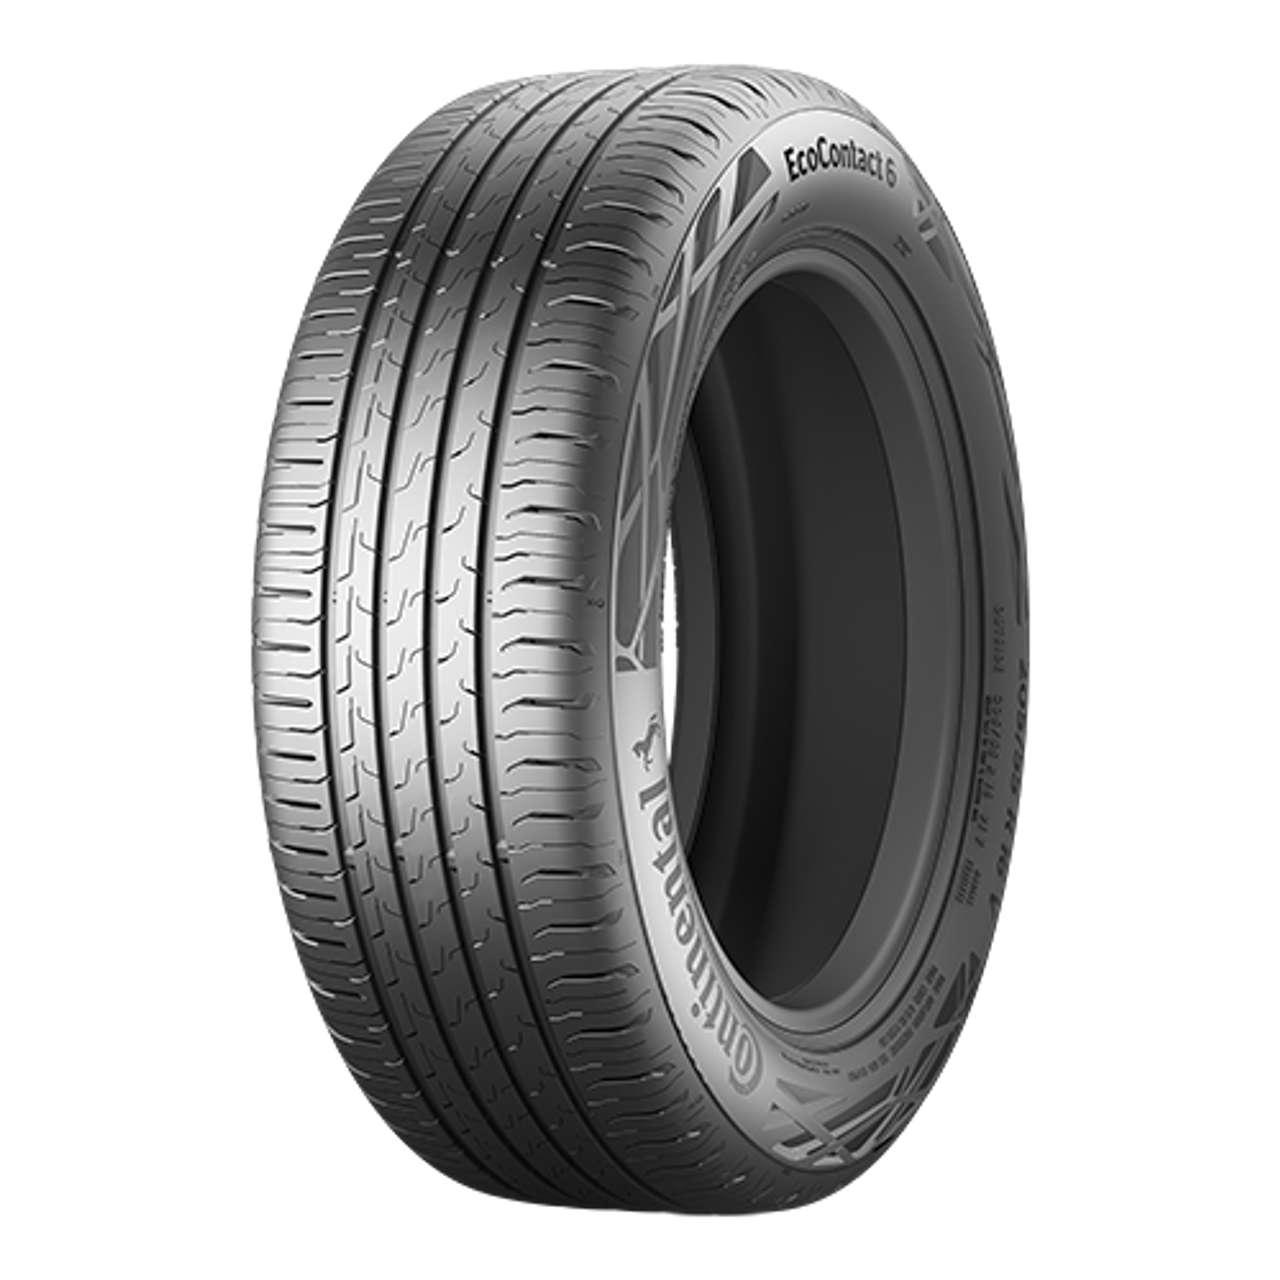 CONTINENTAL ECOCONTACT 6 (EVc) 215/60R16 95V 